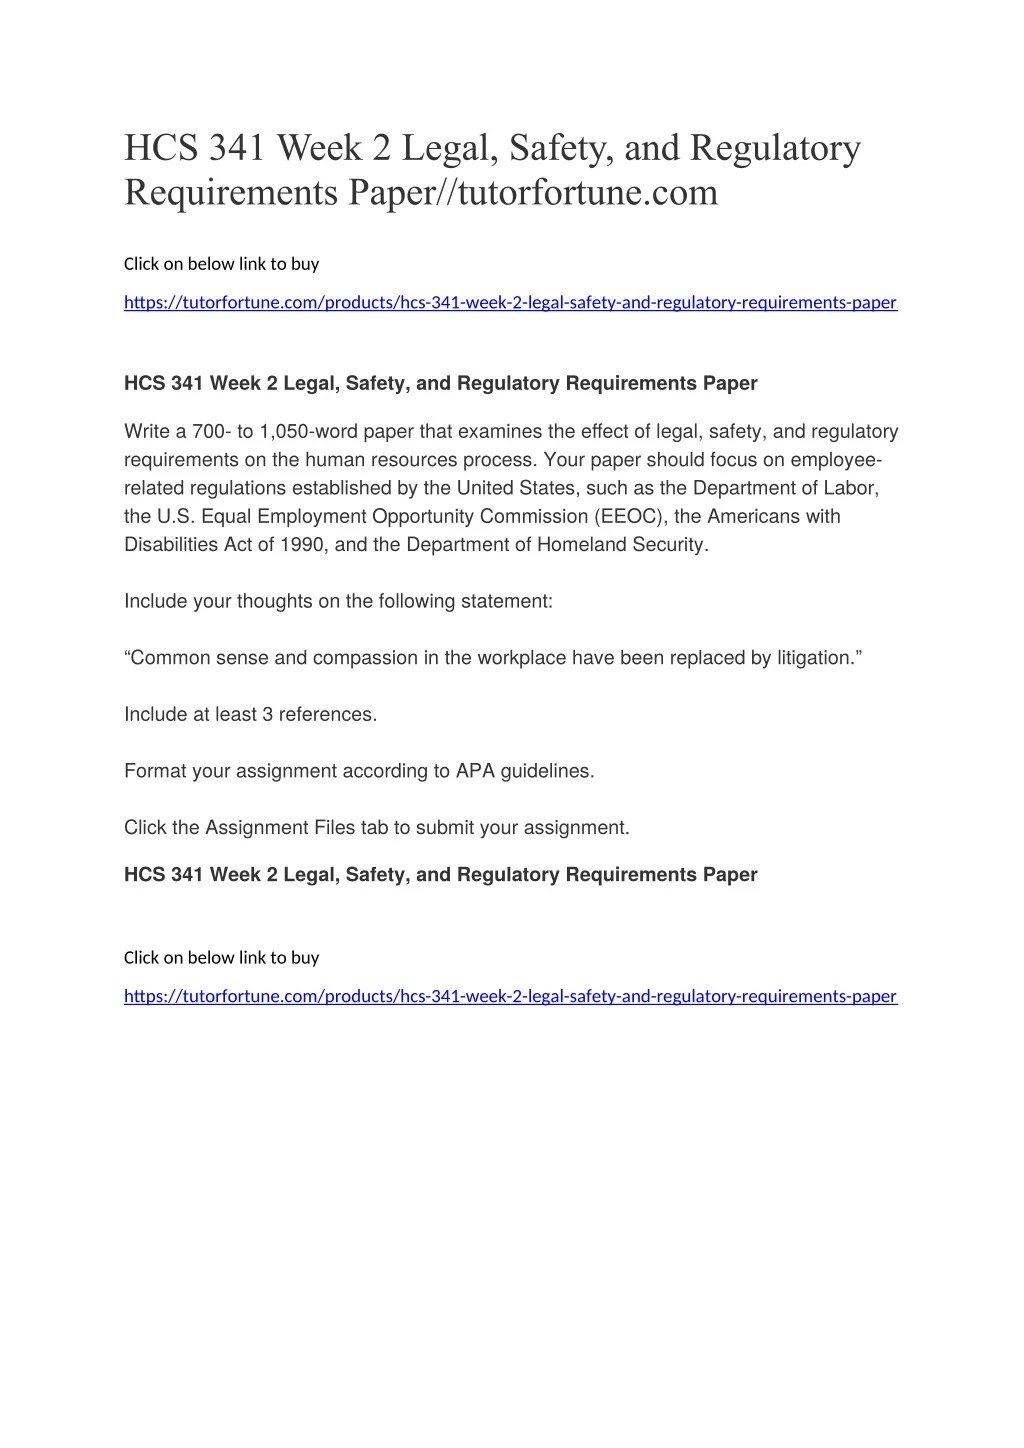 hcs 341 week 2 legal safety and regulatory